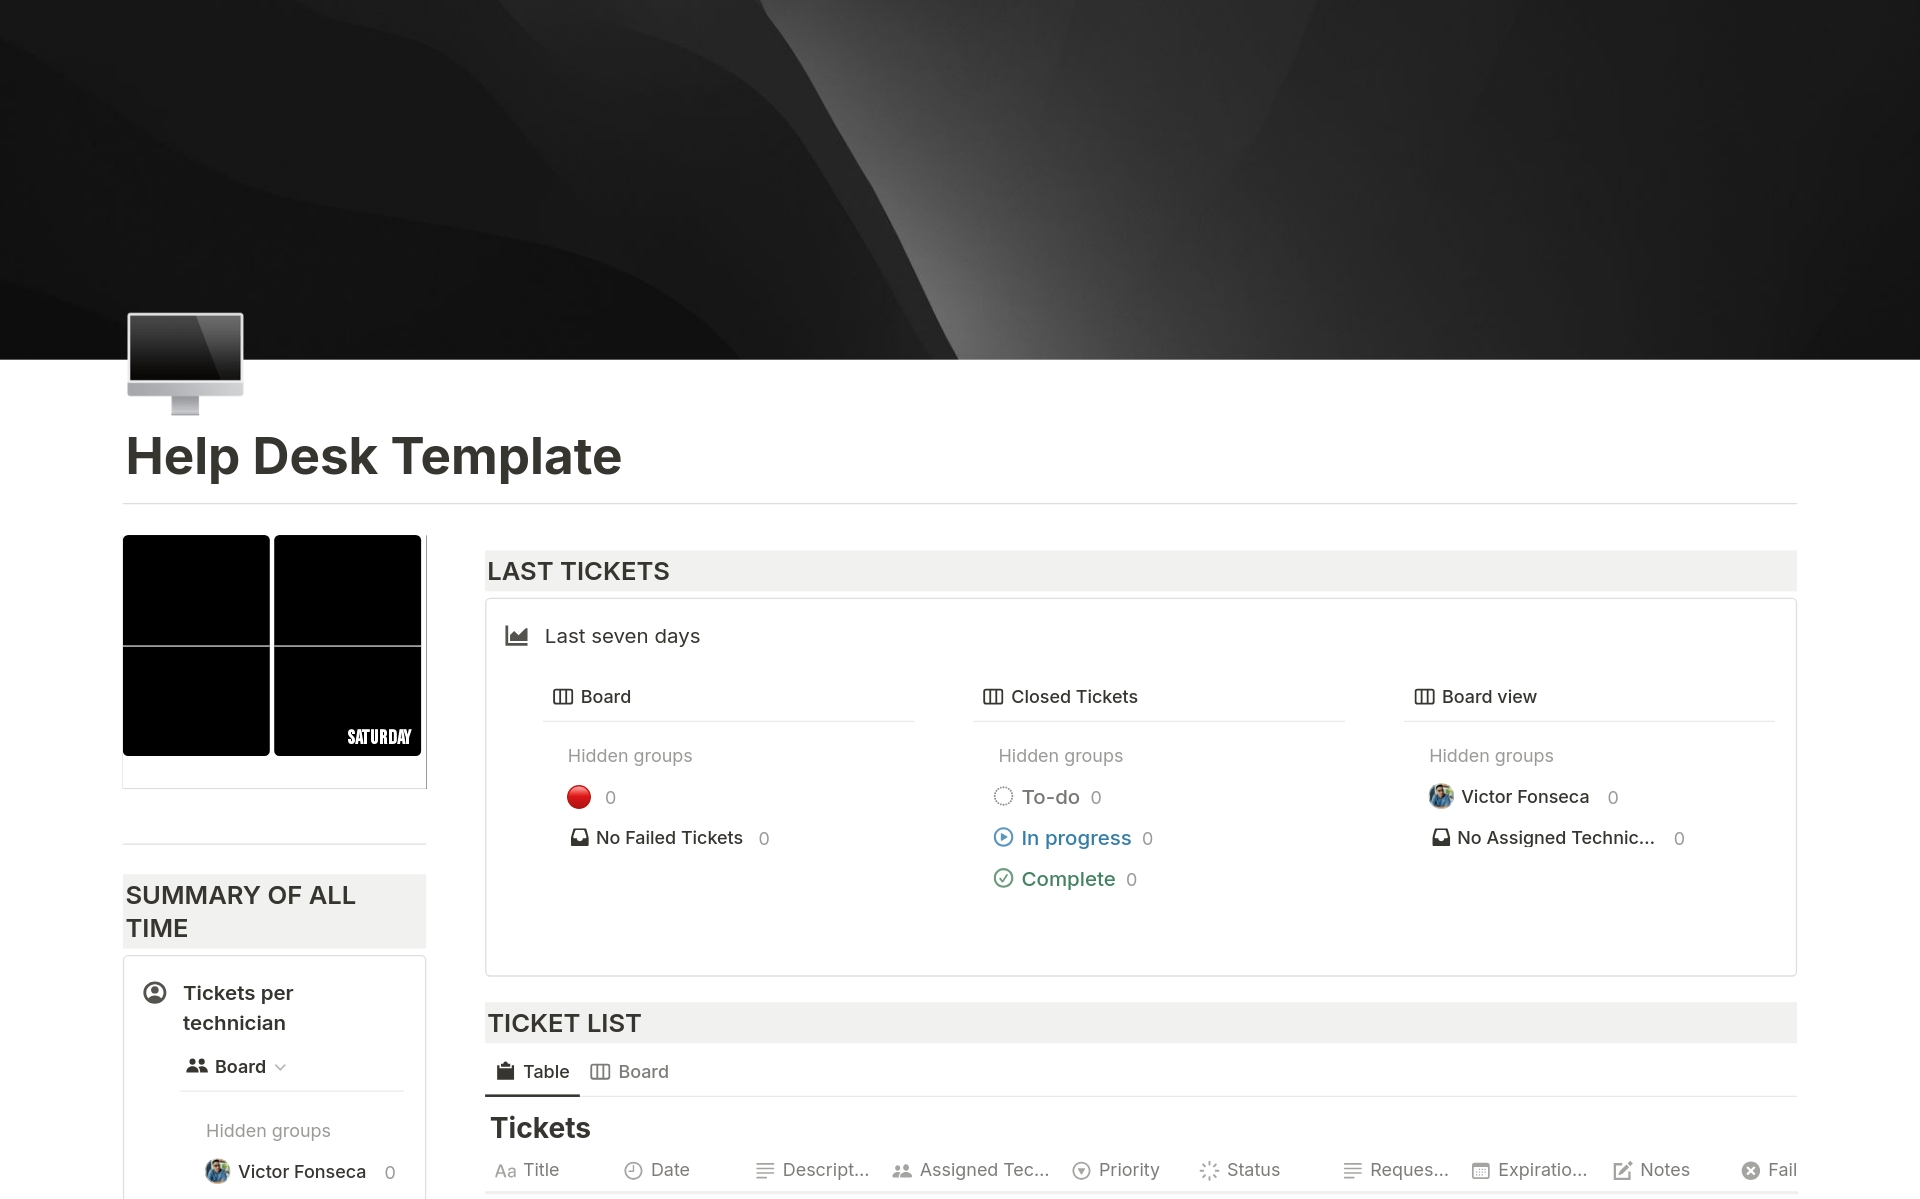 ¡Forget about chaos and take control of technical support with our all-in-one Notion template! This tool allows you to organize ️, manage, and analyze your tickets in a simple and effective way, so that you can provide exceptional service to your users.